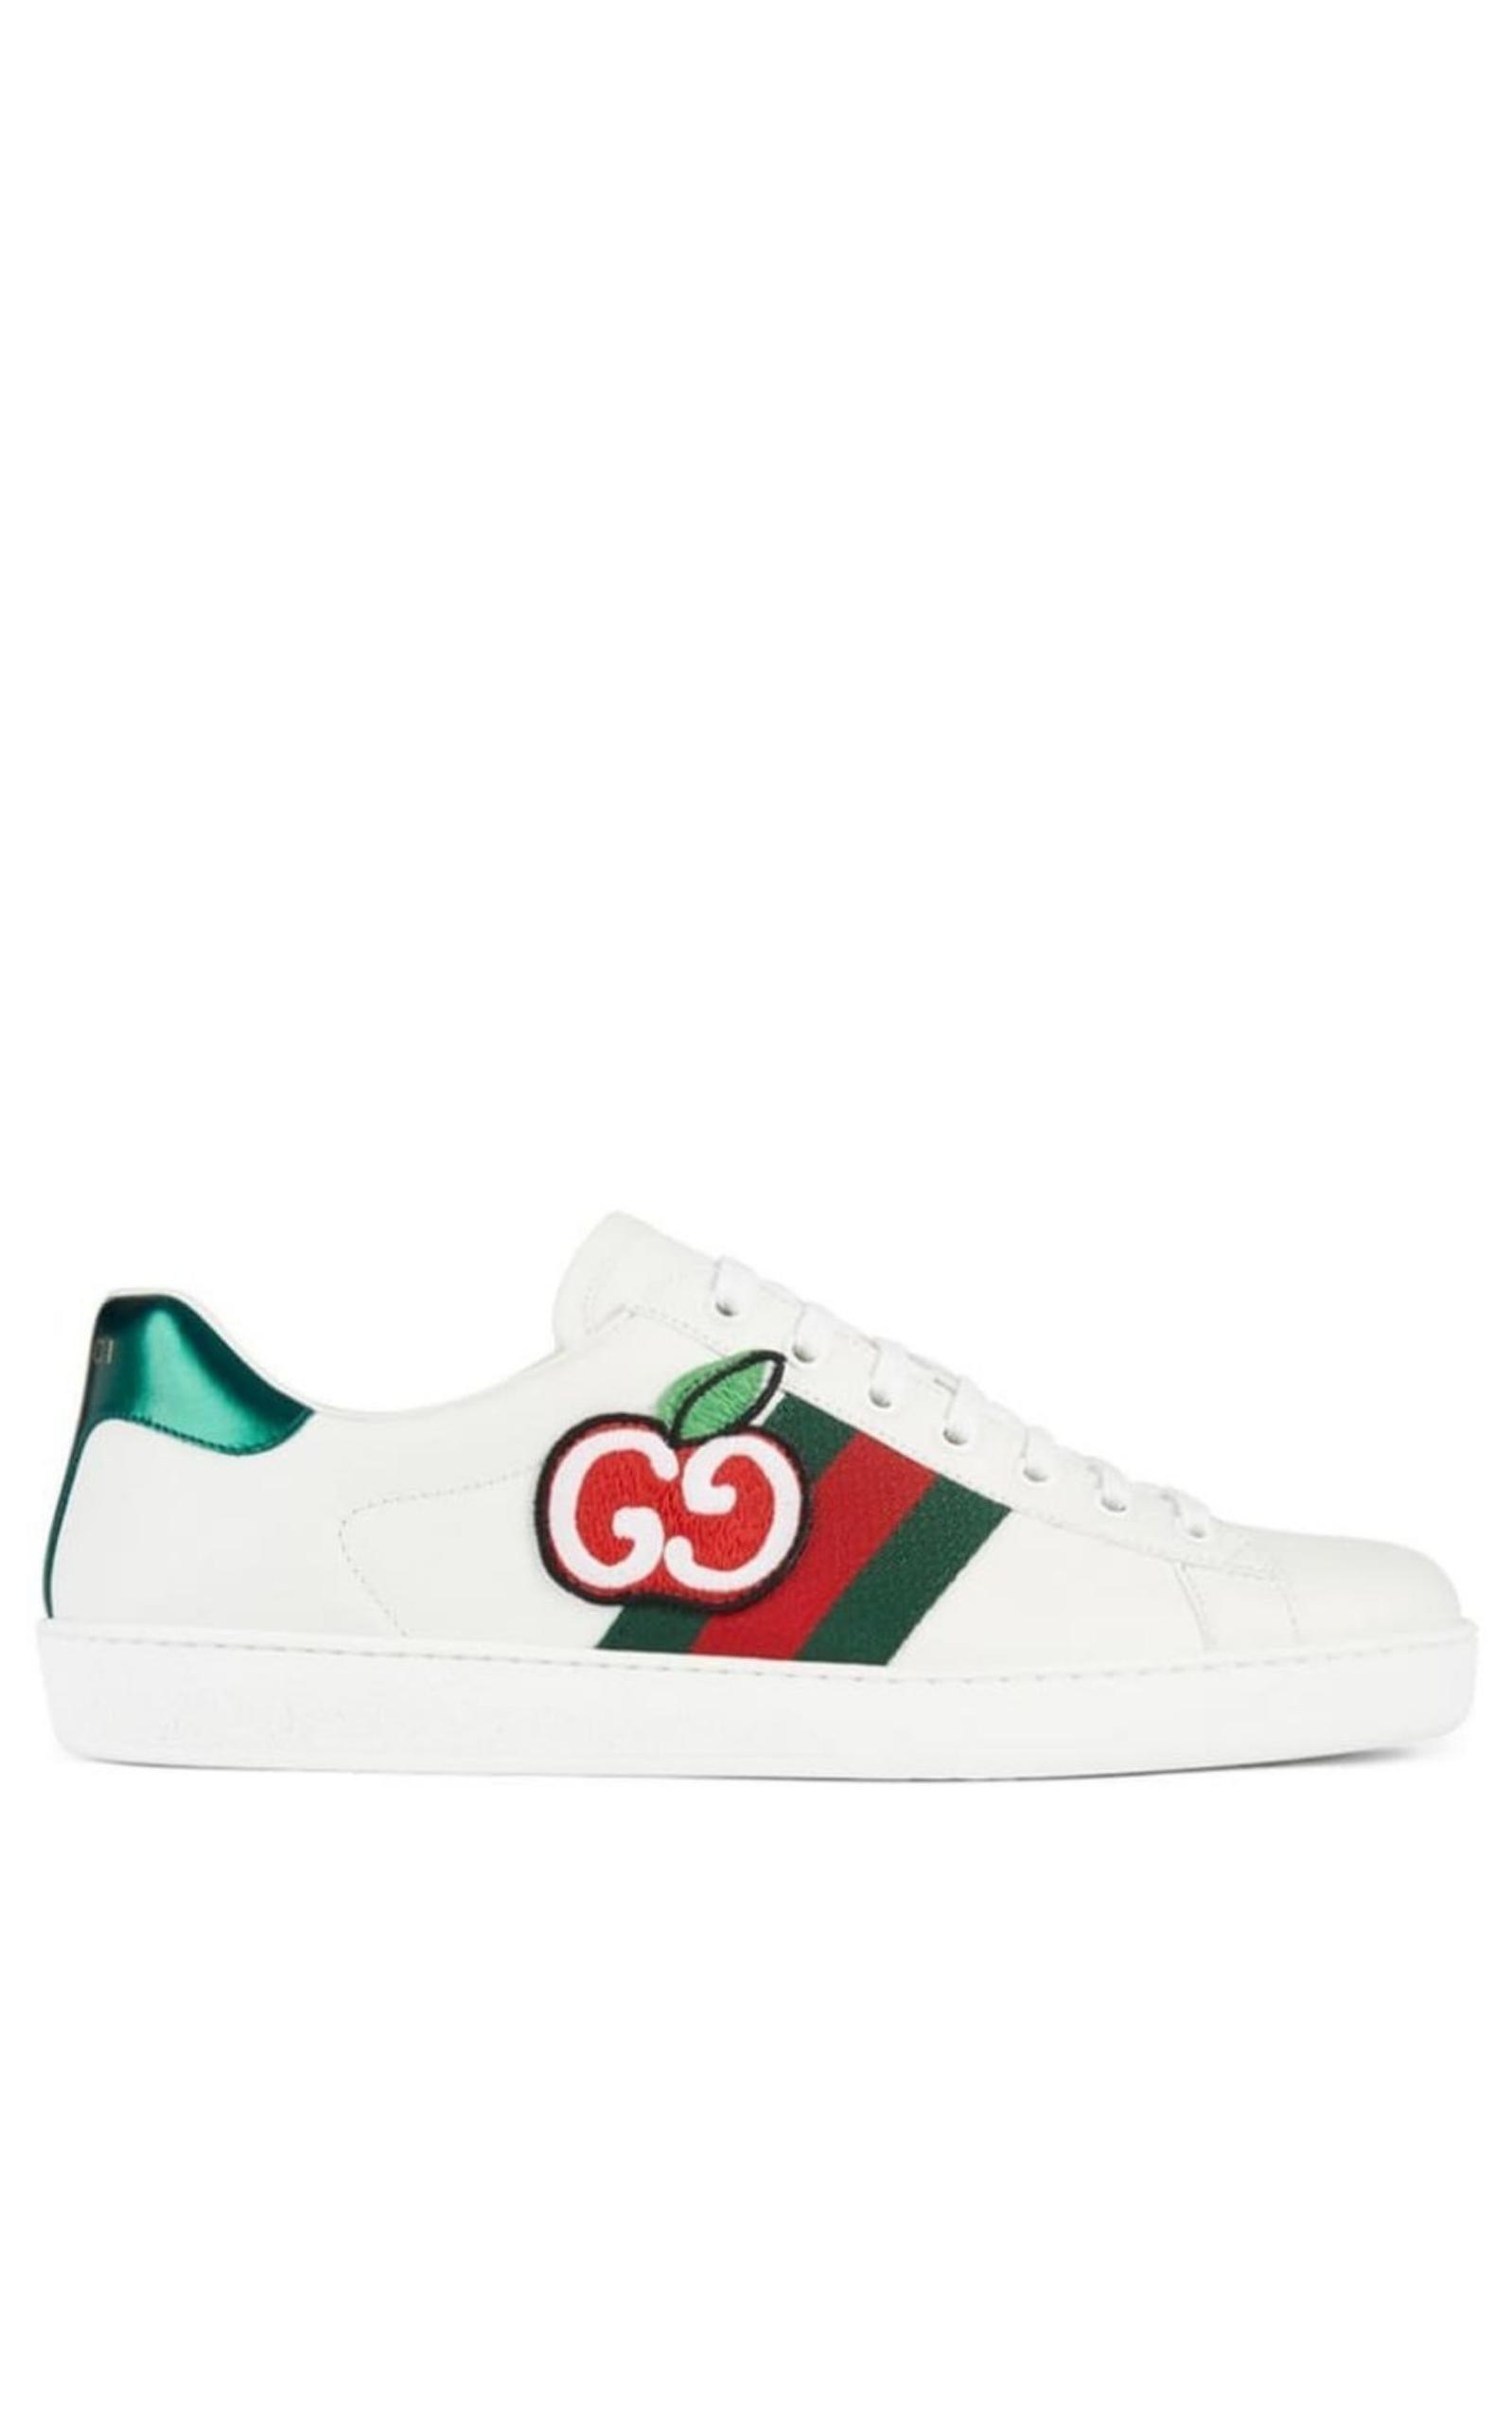 Gucci Ace Sneakers Embroidered Low-Top shoes leather womens white size 38eu  8us | eBay